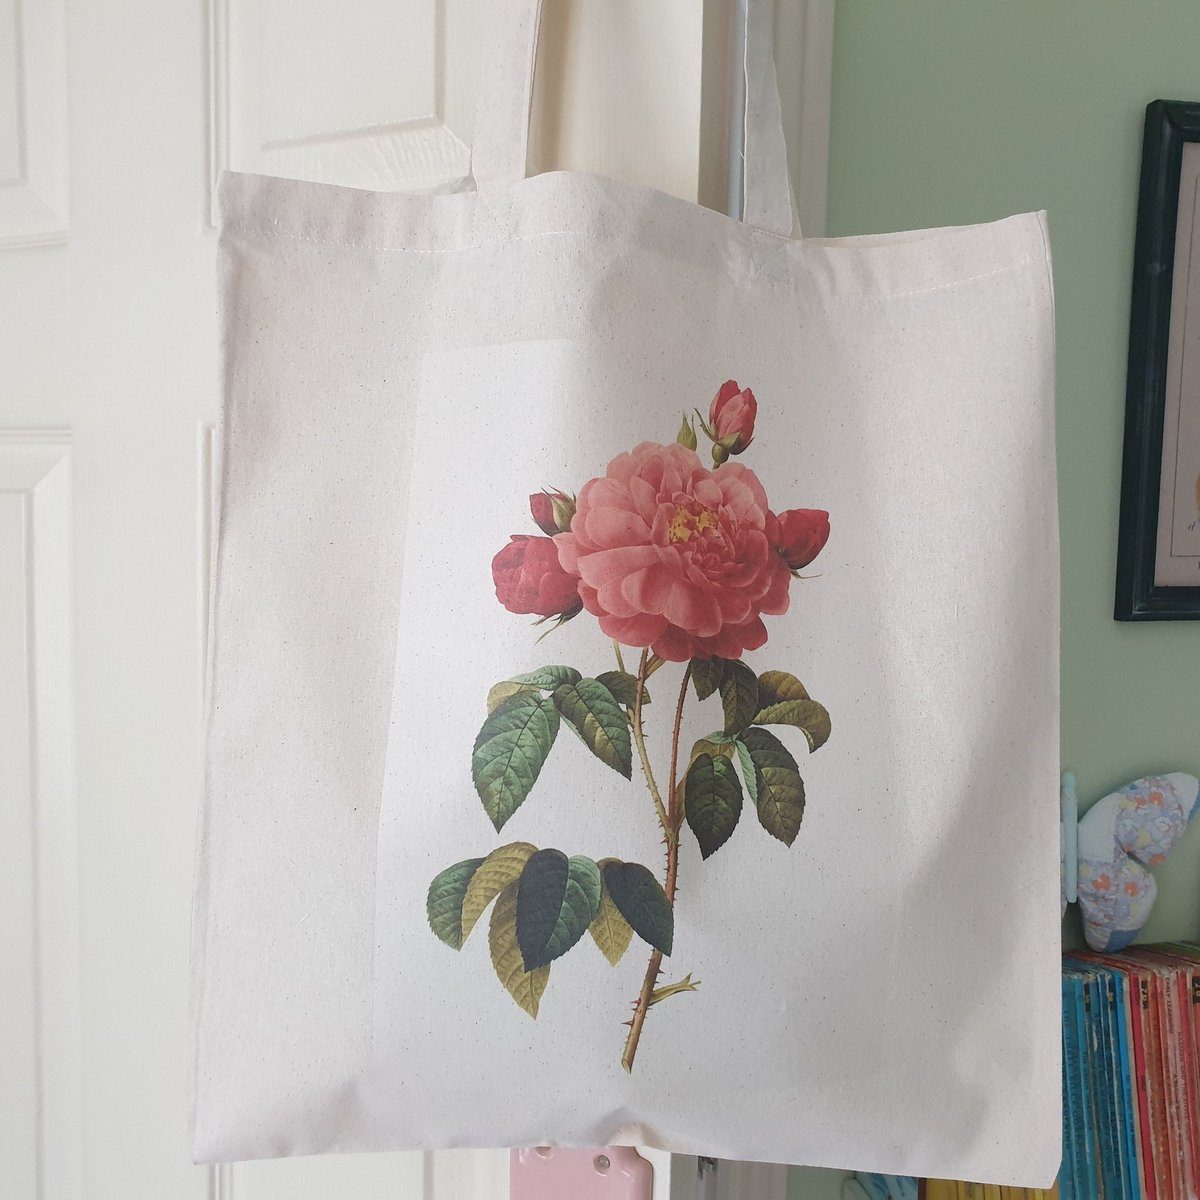 Here's the other rose print cotton tote. Perfect for the garden lover! #earlybiz #craftbizparty sarahbenning.etsy.com/listing/103431…